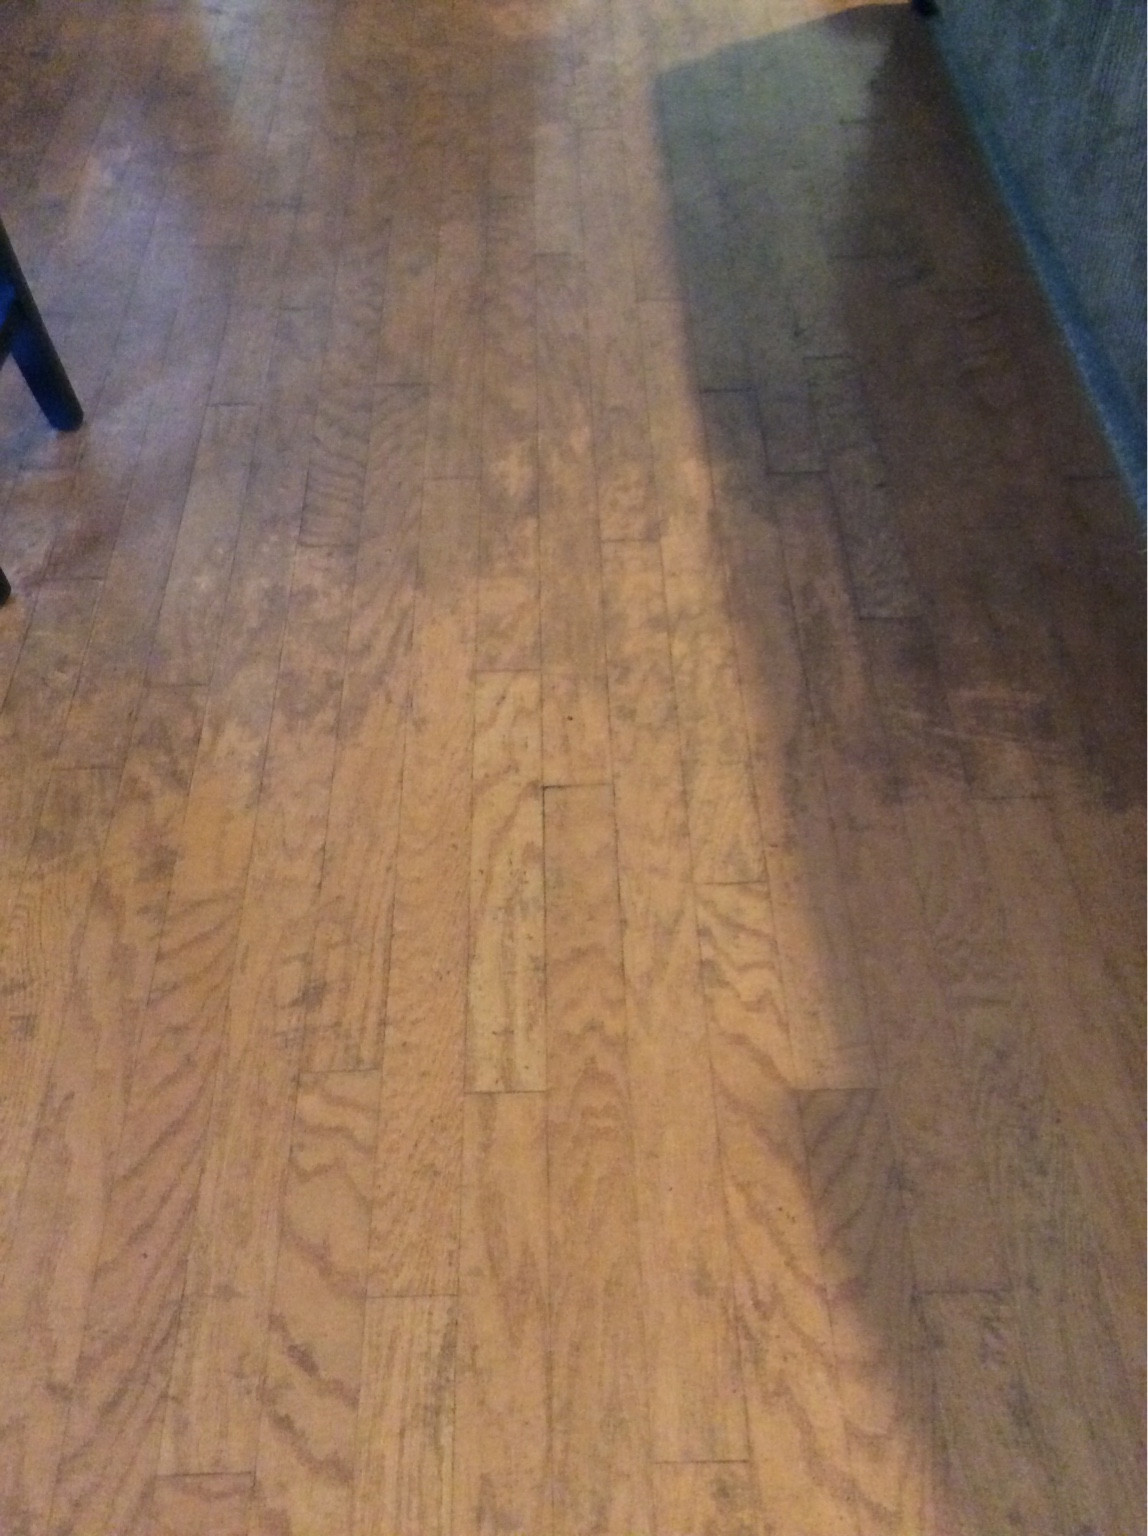 13 Elegant Hardwood Floor Cleaner No Residue 2024 free download hardwood floor cleaner no residue of hardwood floor cleaning help truckmount forums 1 carpet intended for how would you guys clean this wood floors